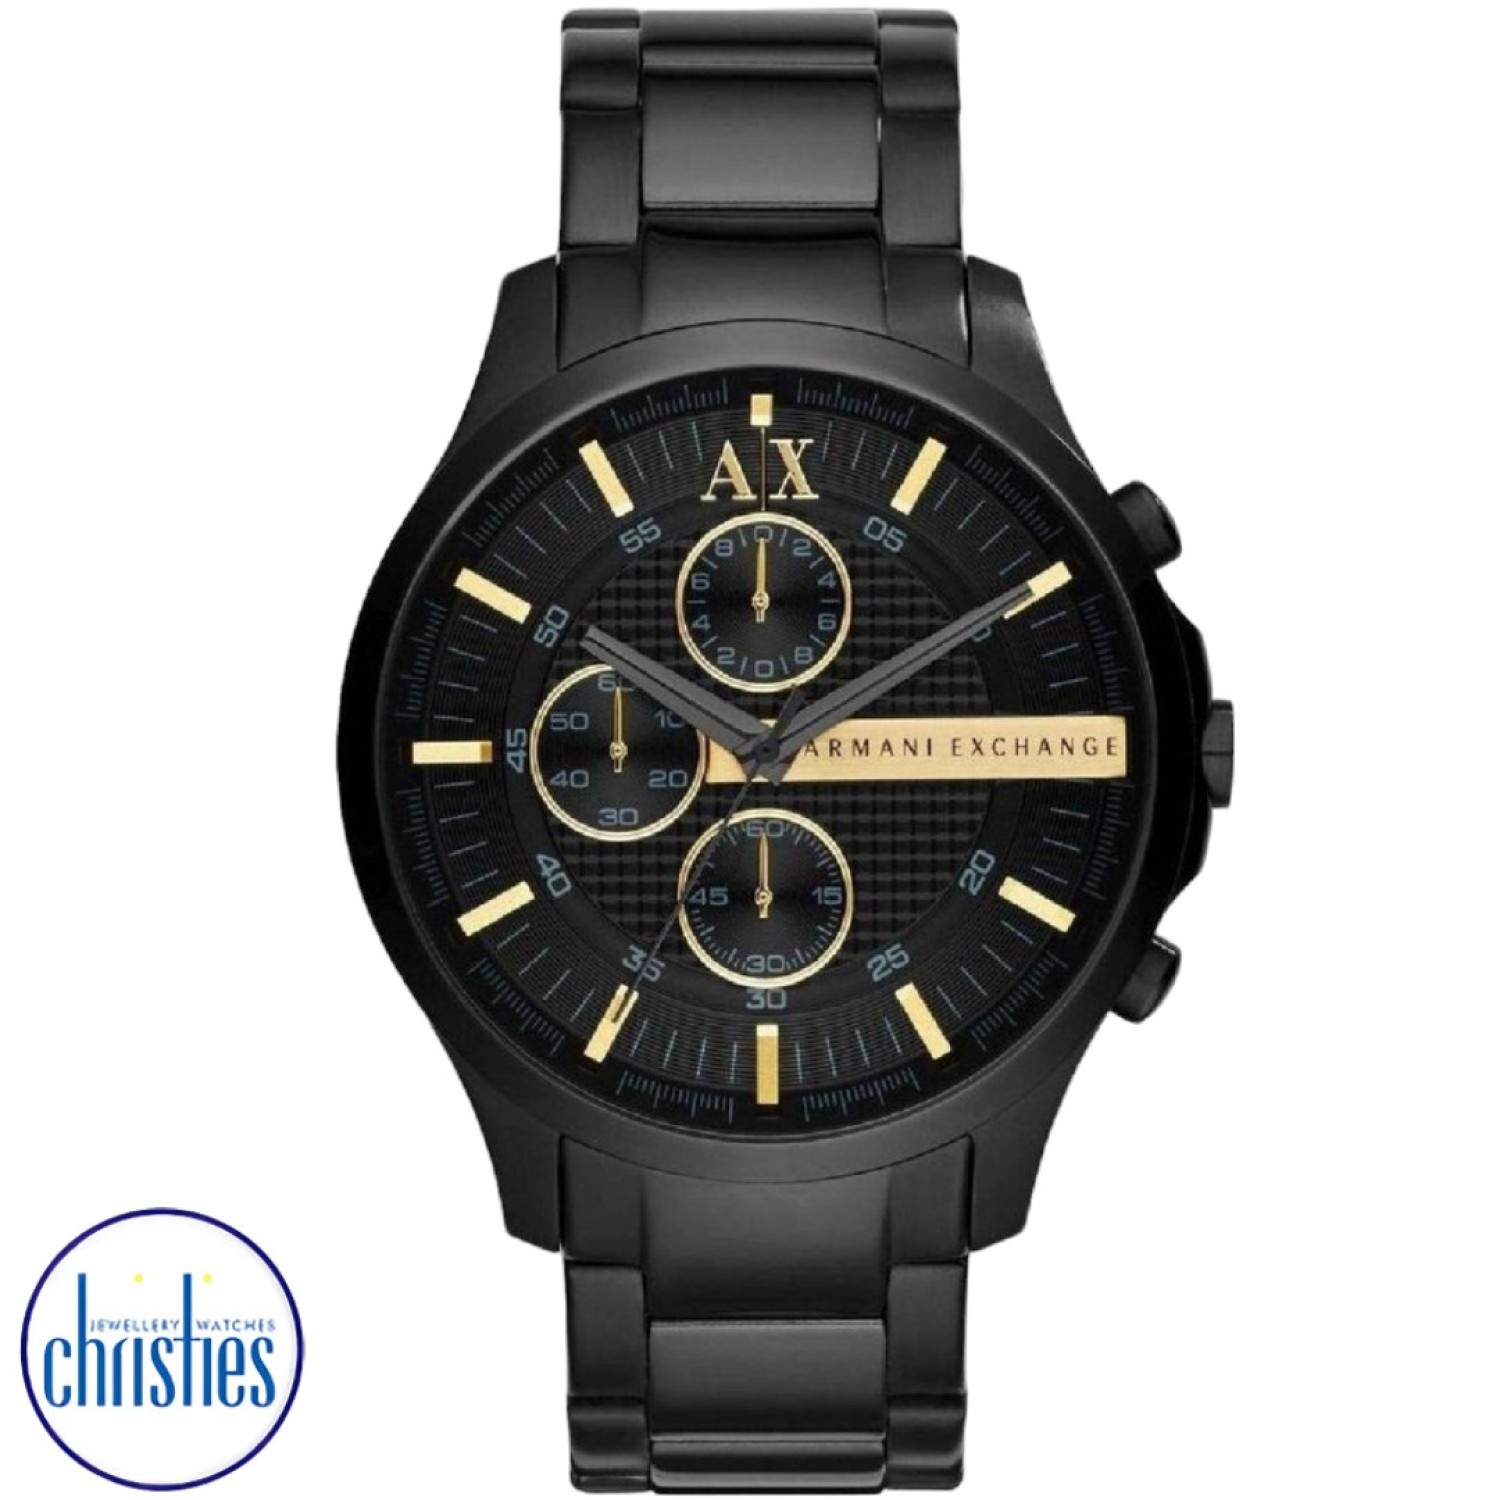 AX2164 A|X  Armani Exchange Hampton  Watch. From the Armani Exchange collection, the Gents Armani Exchange Hampton Chronograph Watch is a chic, sophisticated timepiece that delivers. LAYBUY - Pay it easy, in 6 weekly payments and have it now. Only pay the